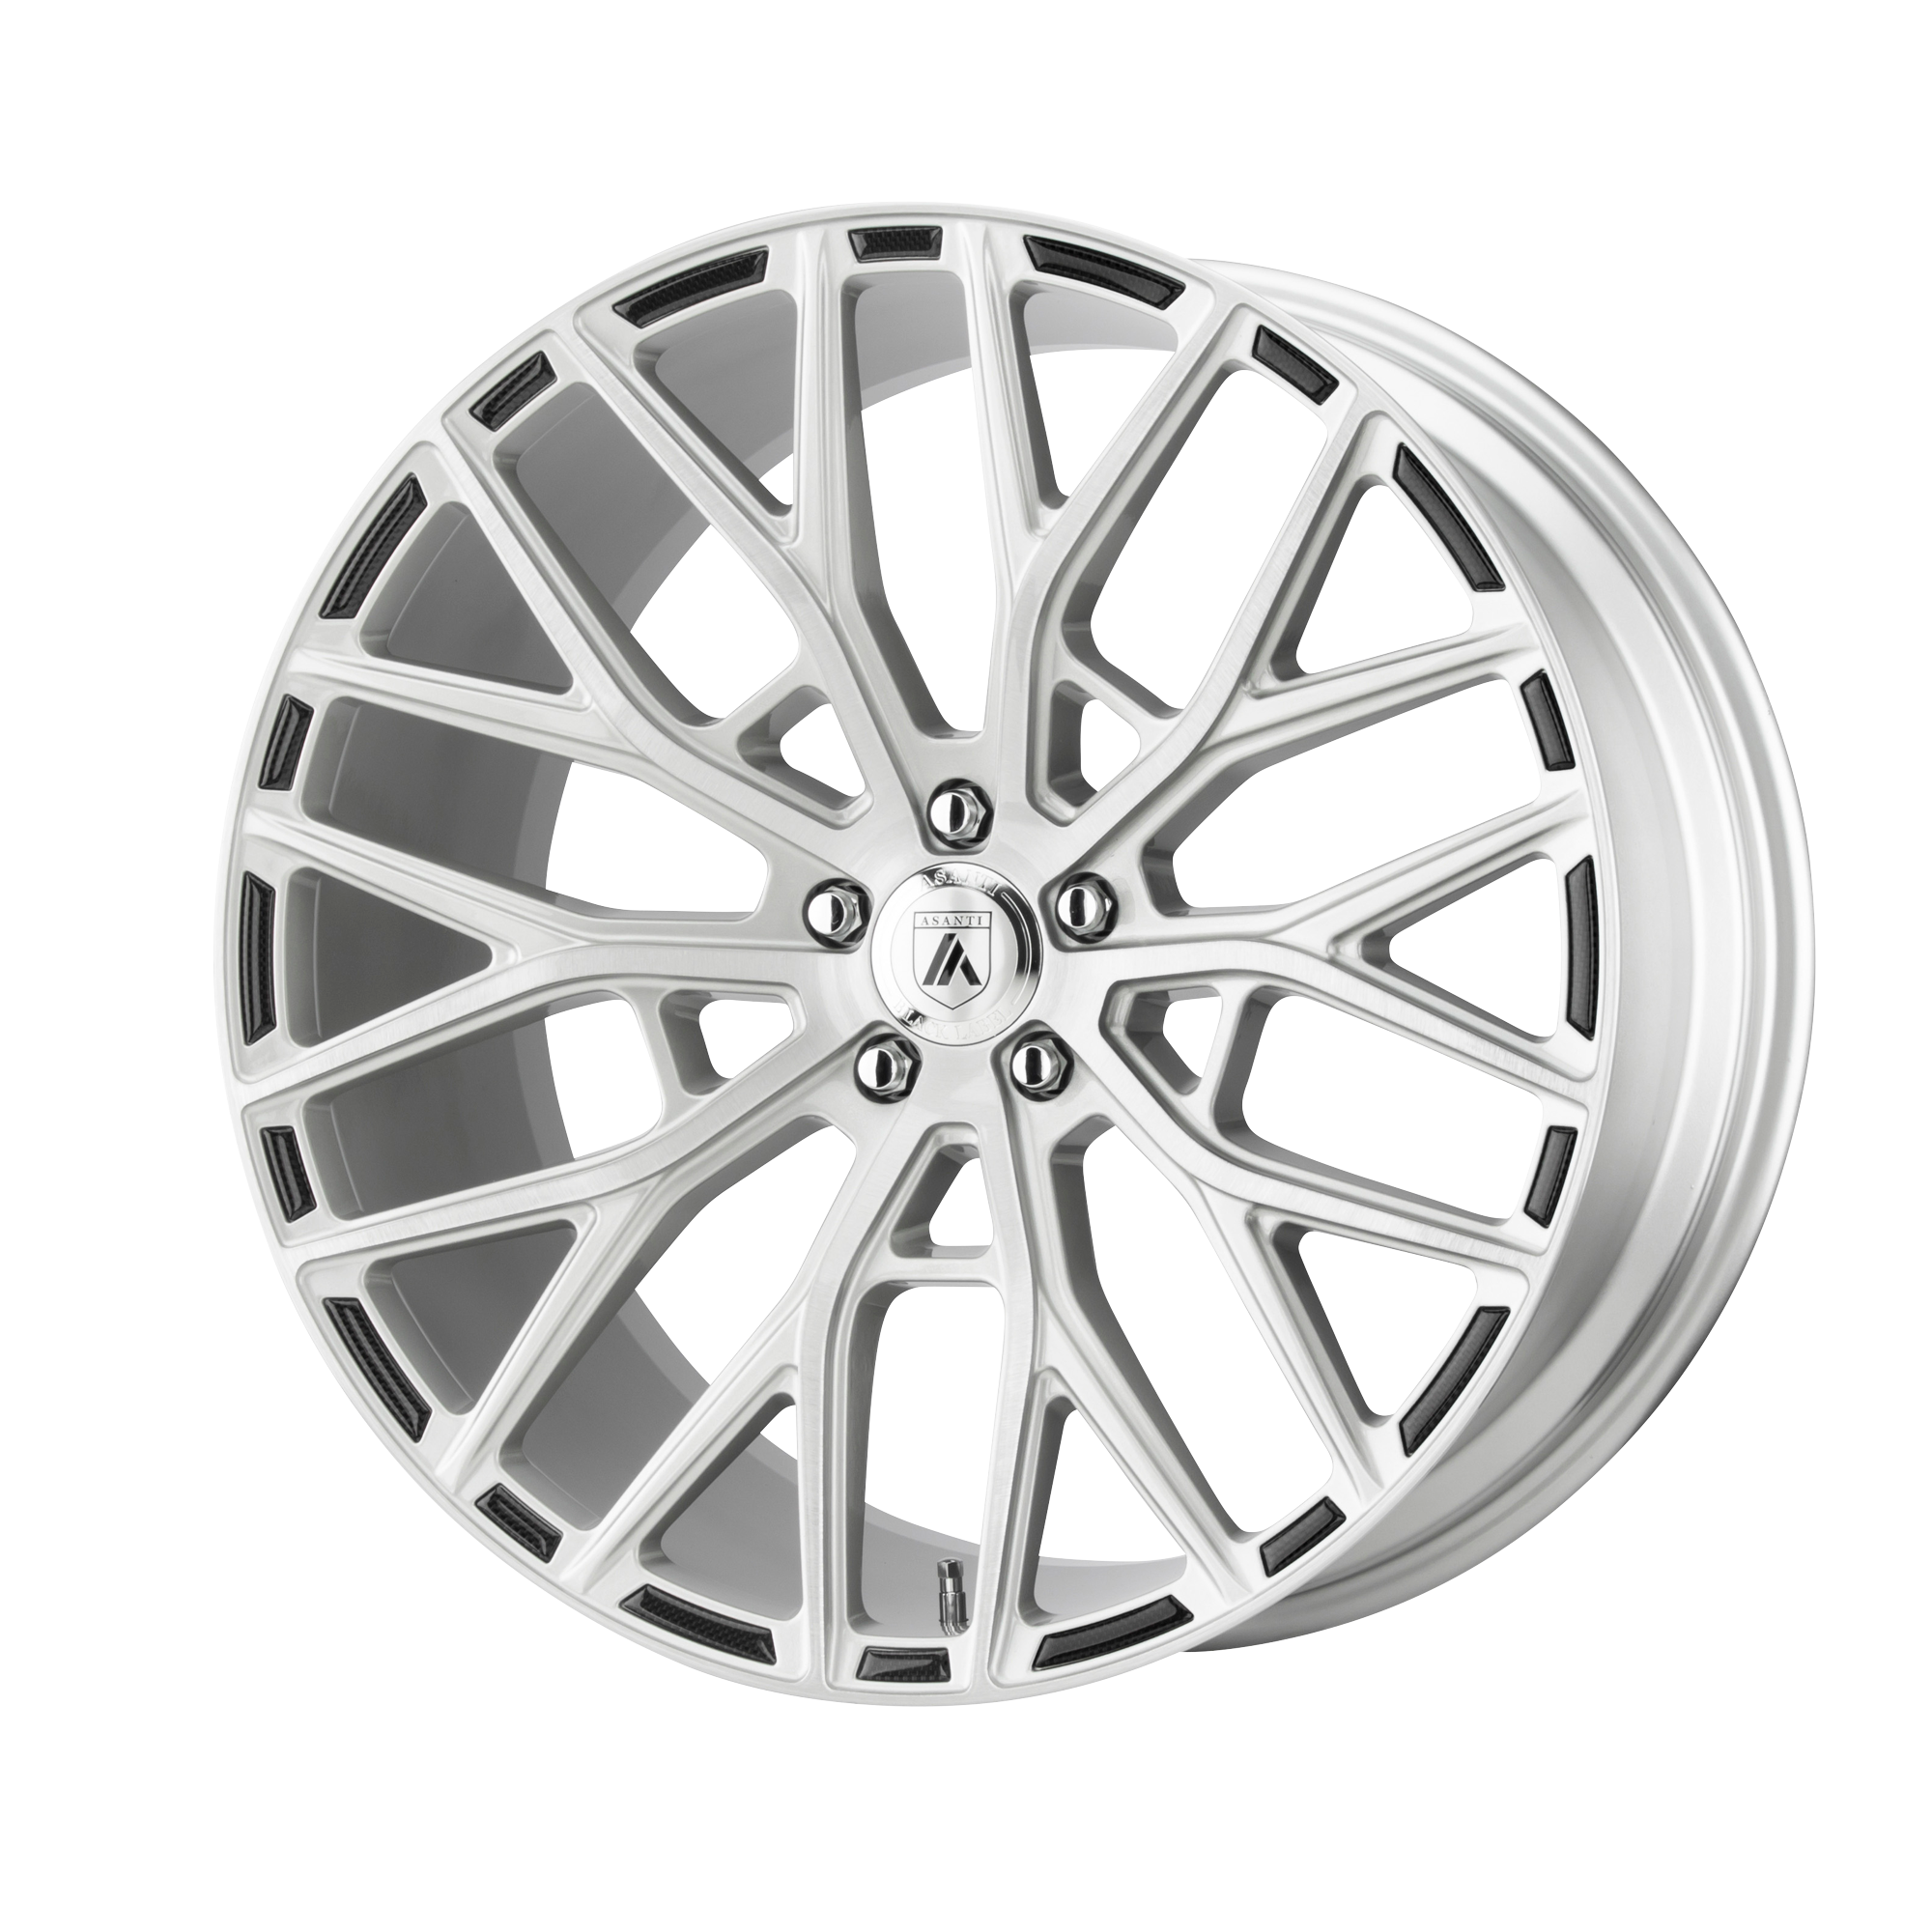 LEO 20x9 5x115.00 BRUSHED SILVER (15 mm) - Tires and Engine Performance